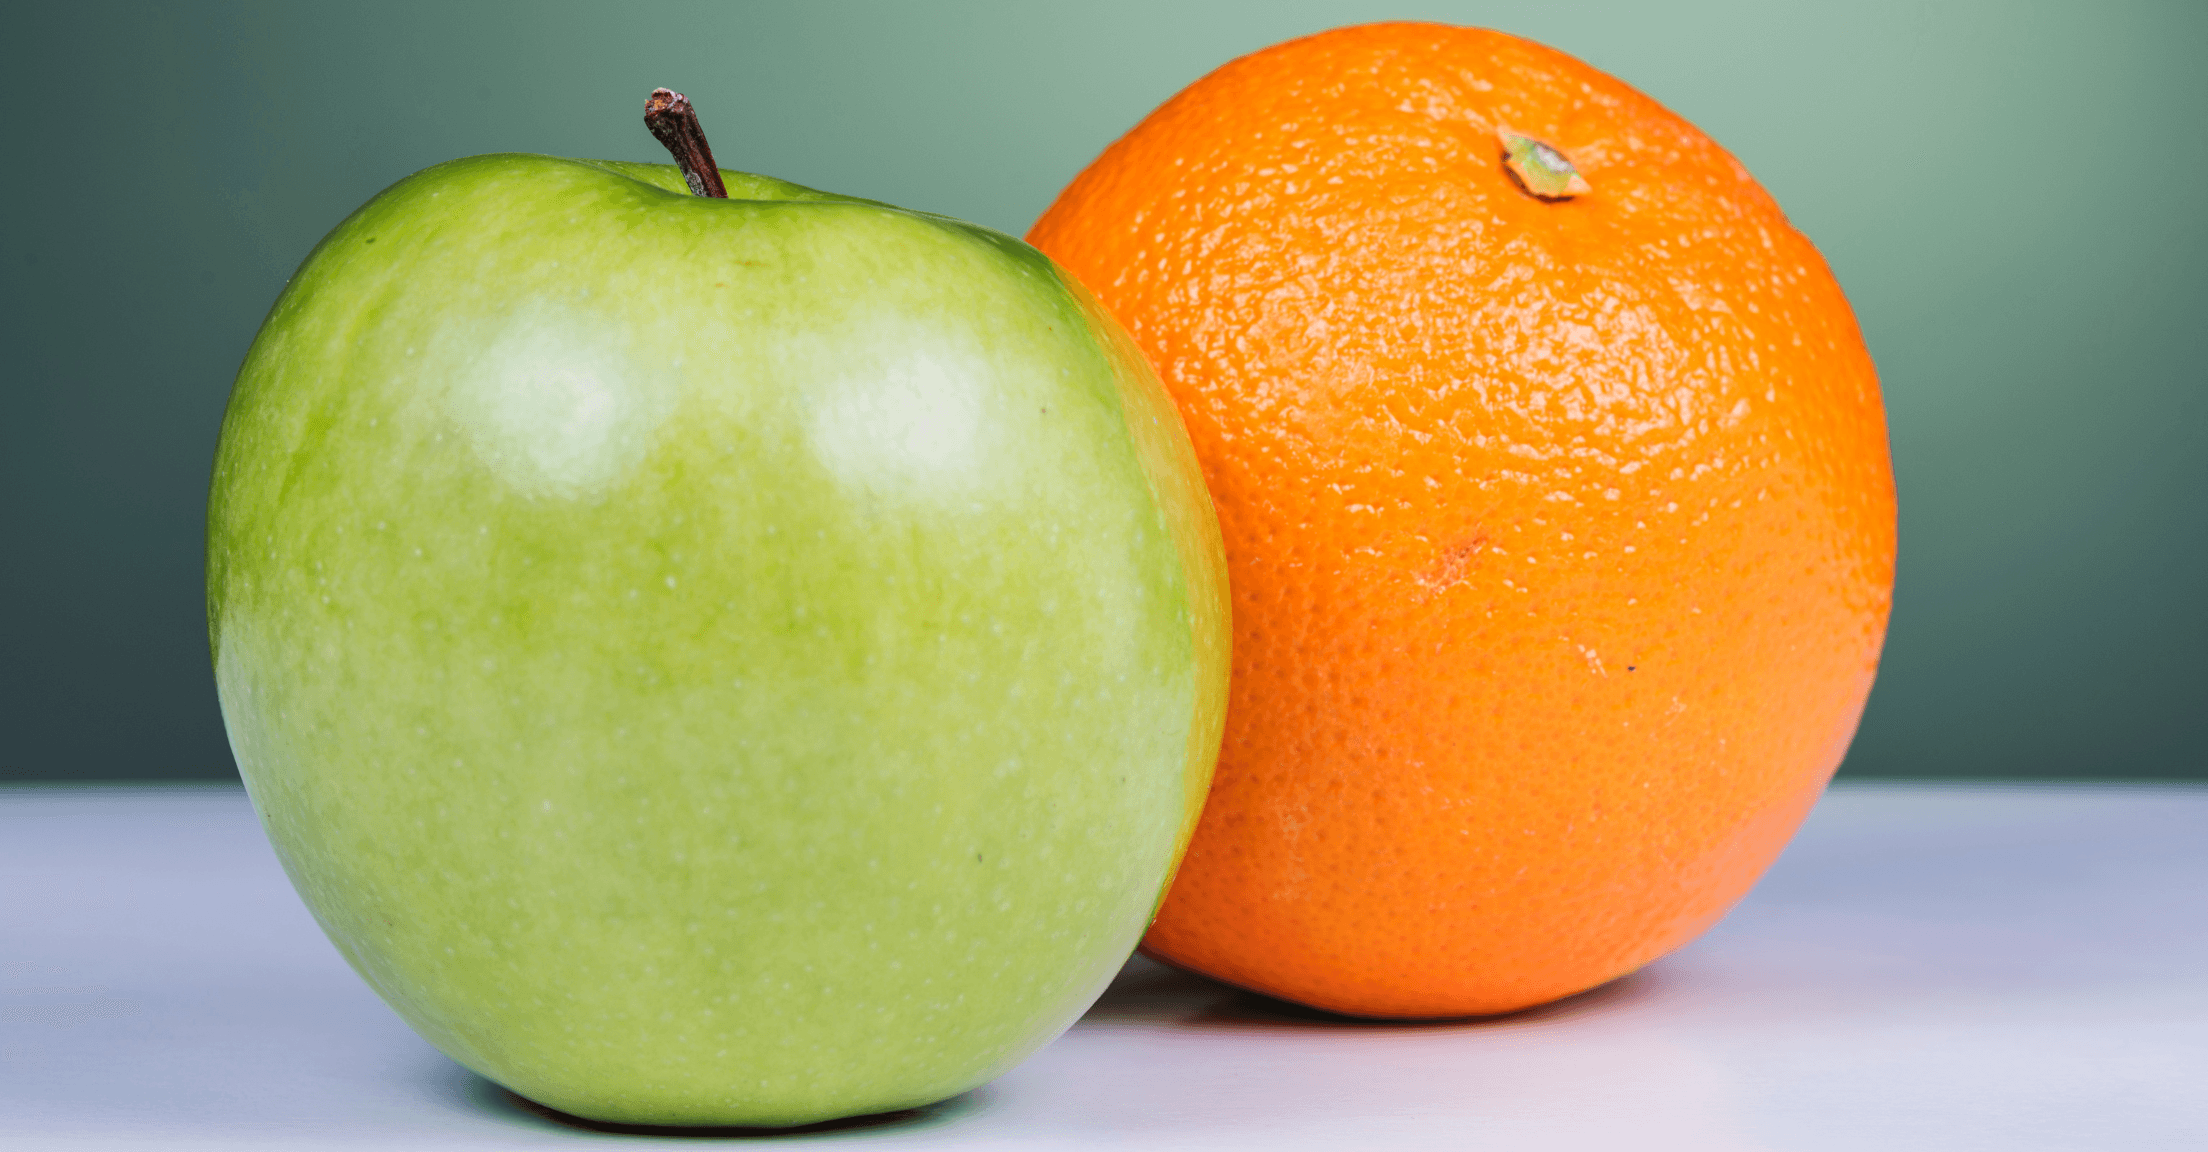 An apple and an orange to indicate a comparison blog post between two financial planning software platforms, RightCapital and MoneyGuidePro